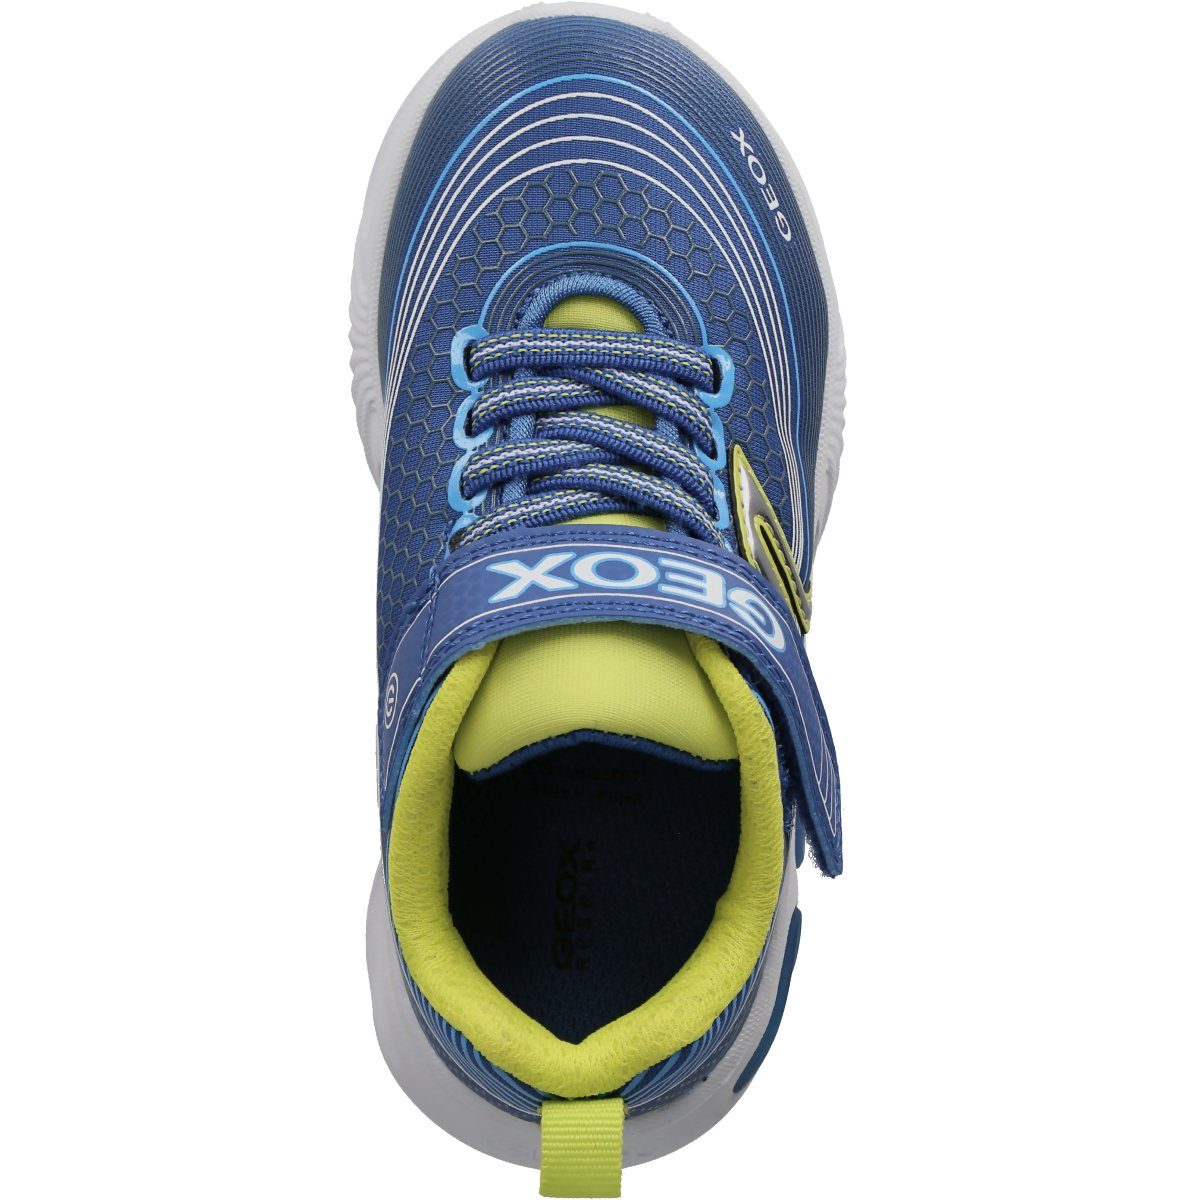 ASSISTER Geox Sneaker ROYAL/LIME